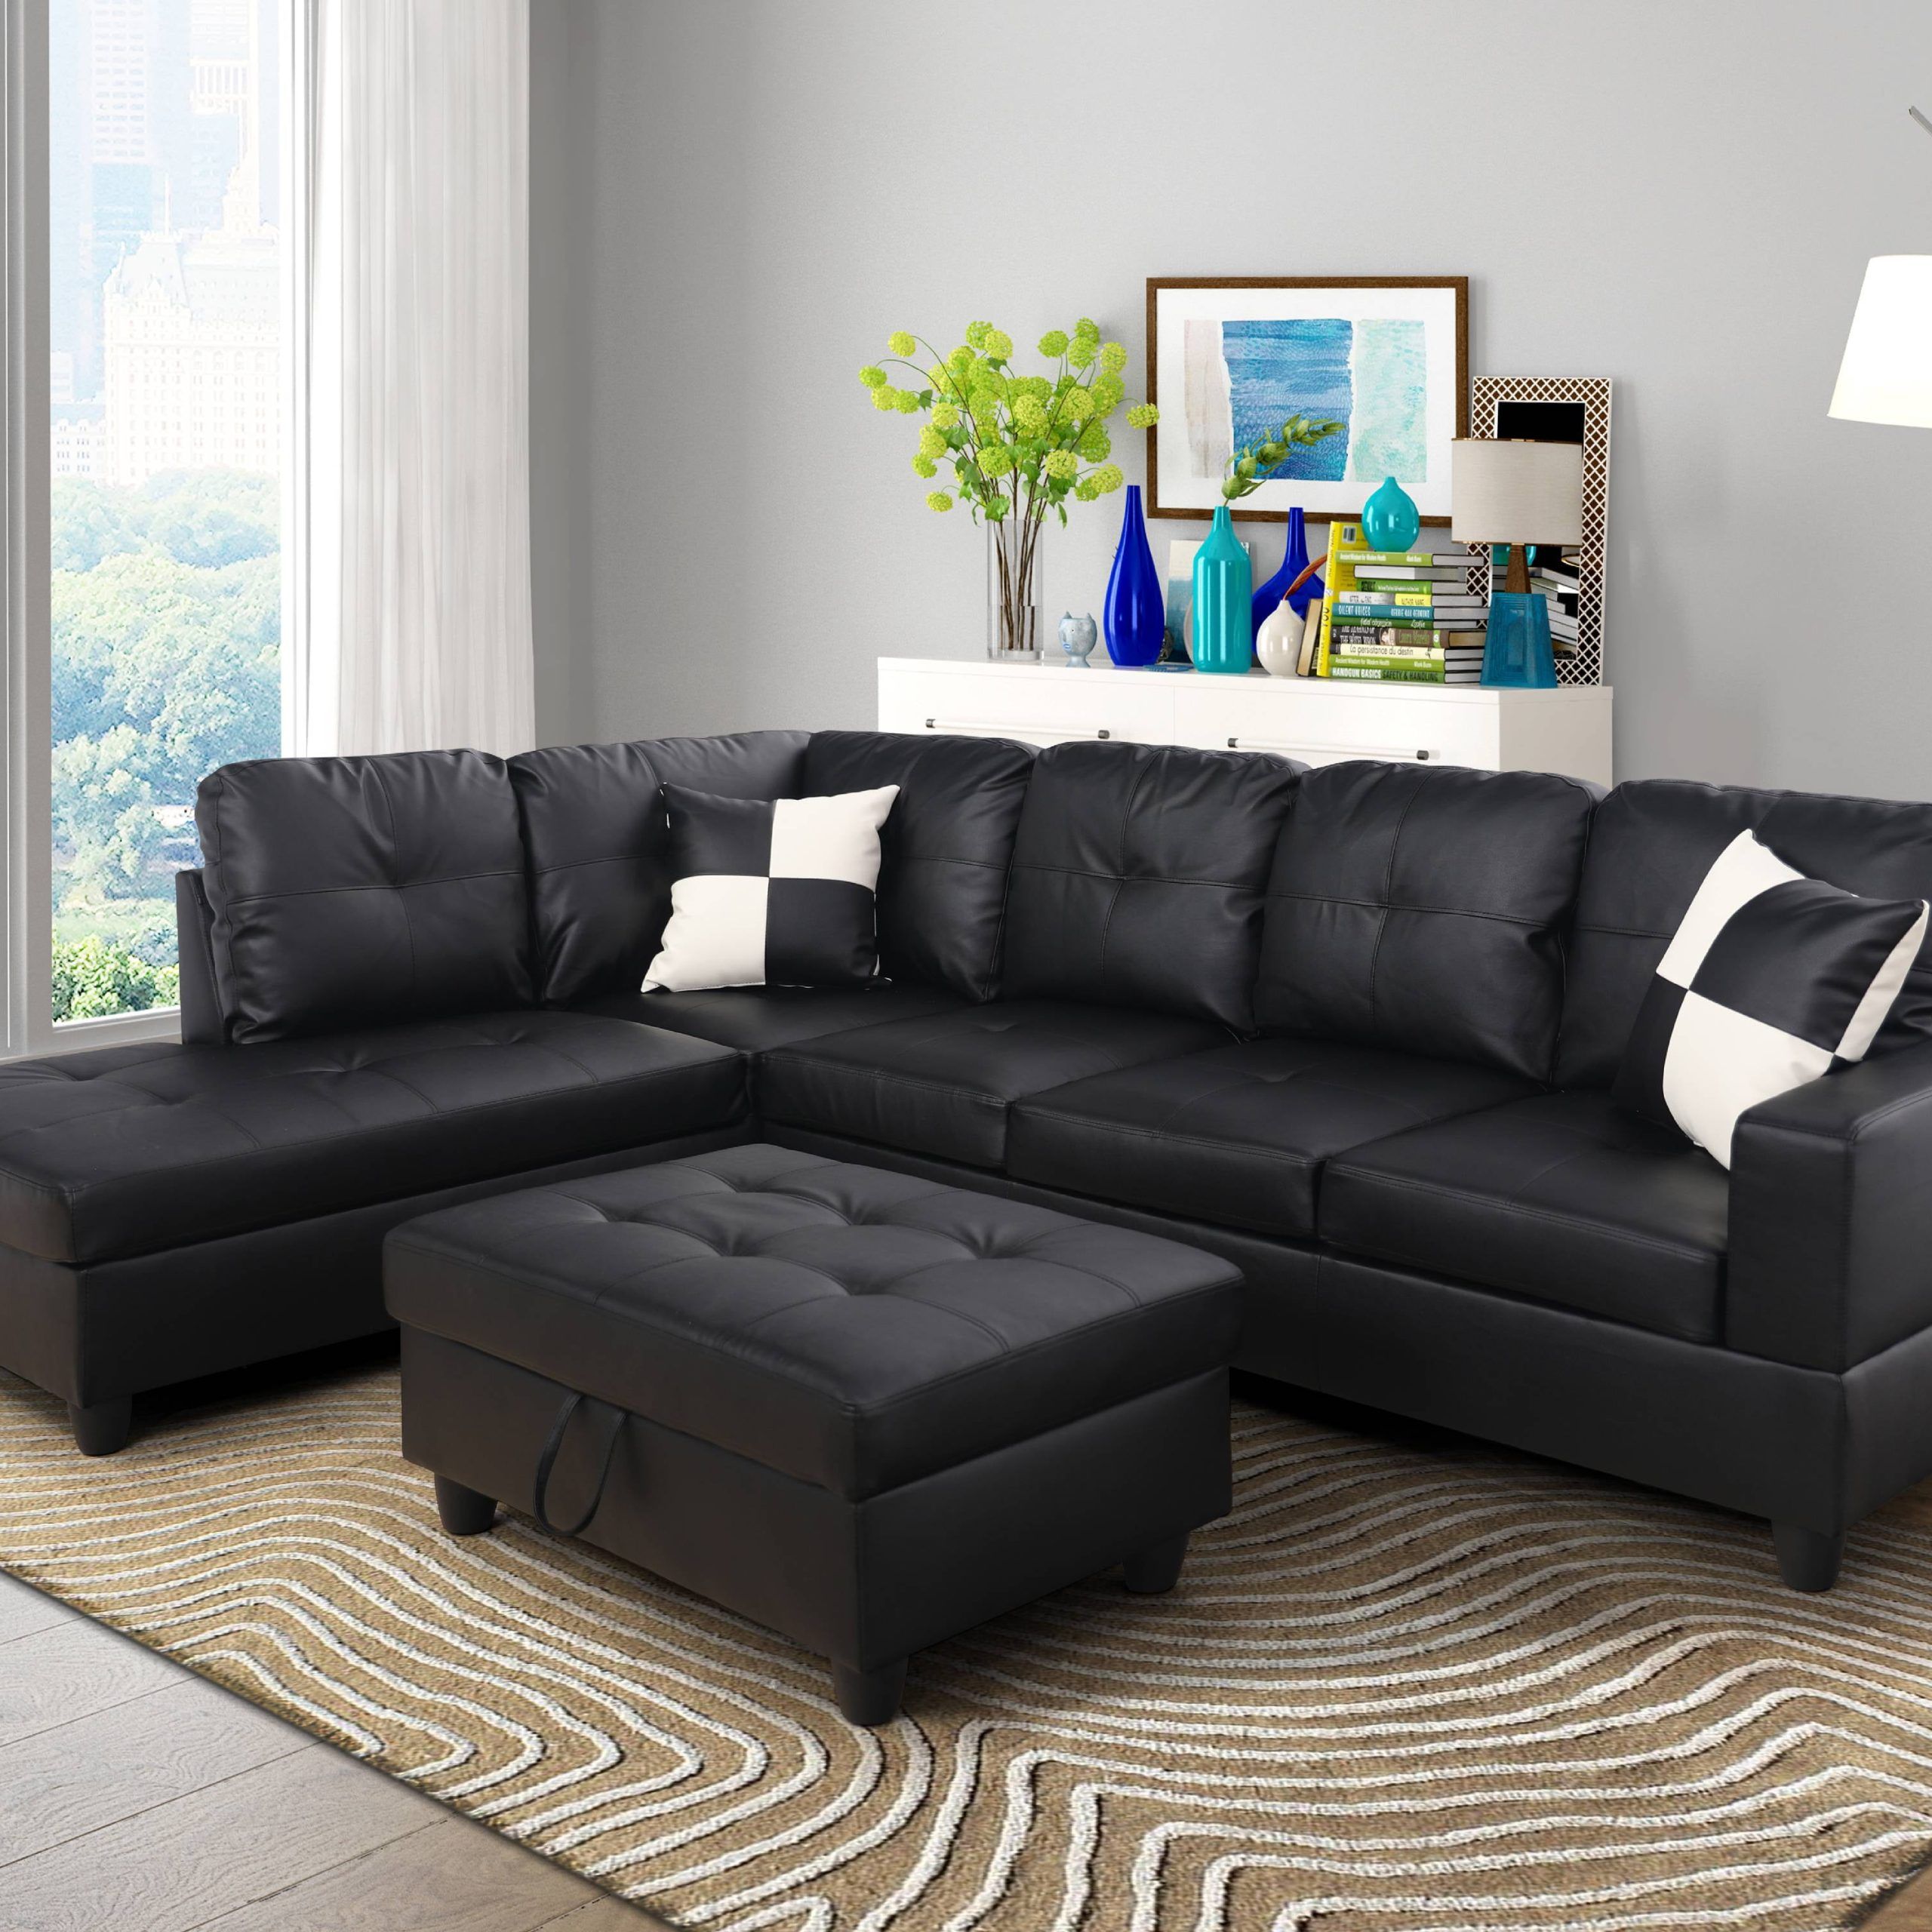 Preferred For U Furnishing Classic Black Faux Leather Sectional Sofa, Right Within Sofas In Black (Photo 13 of 15)